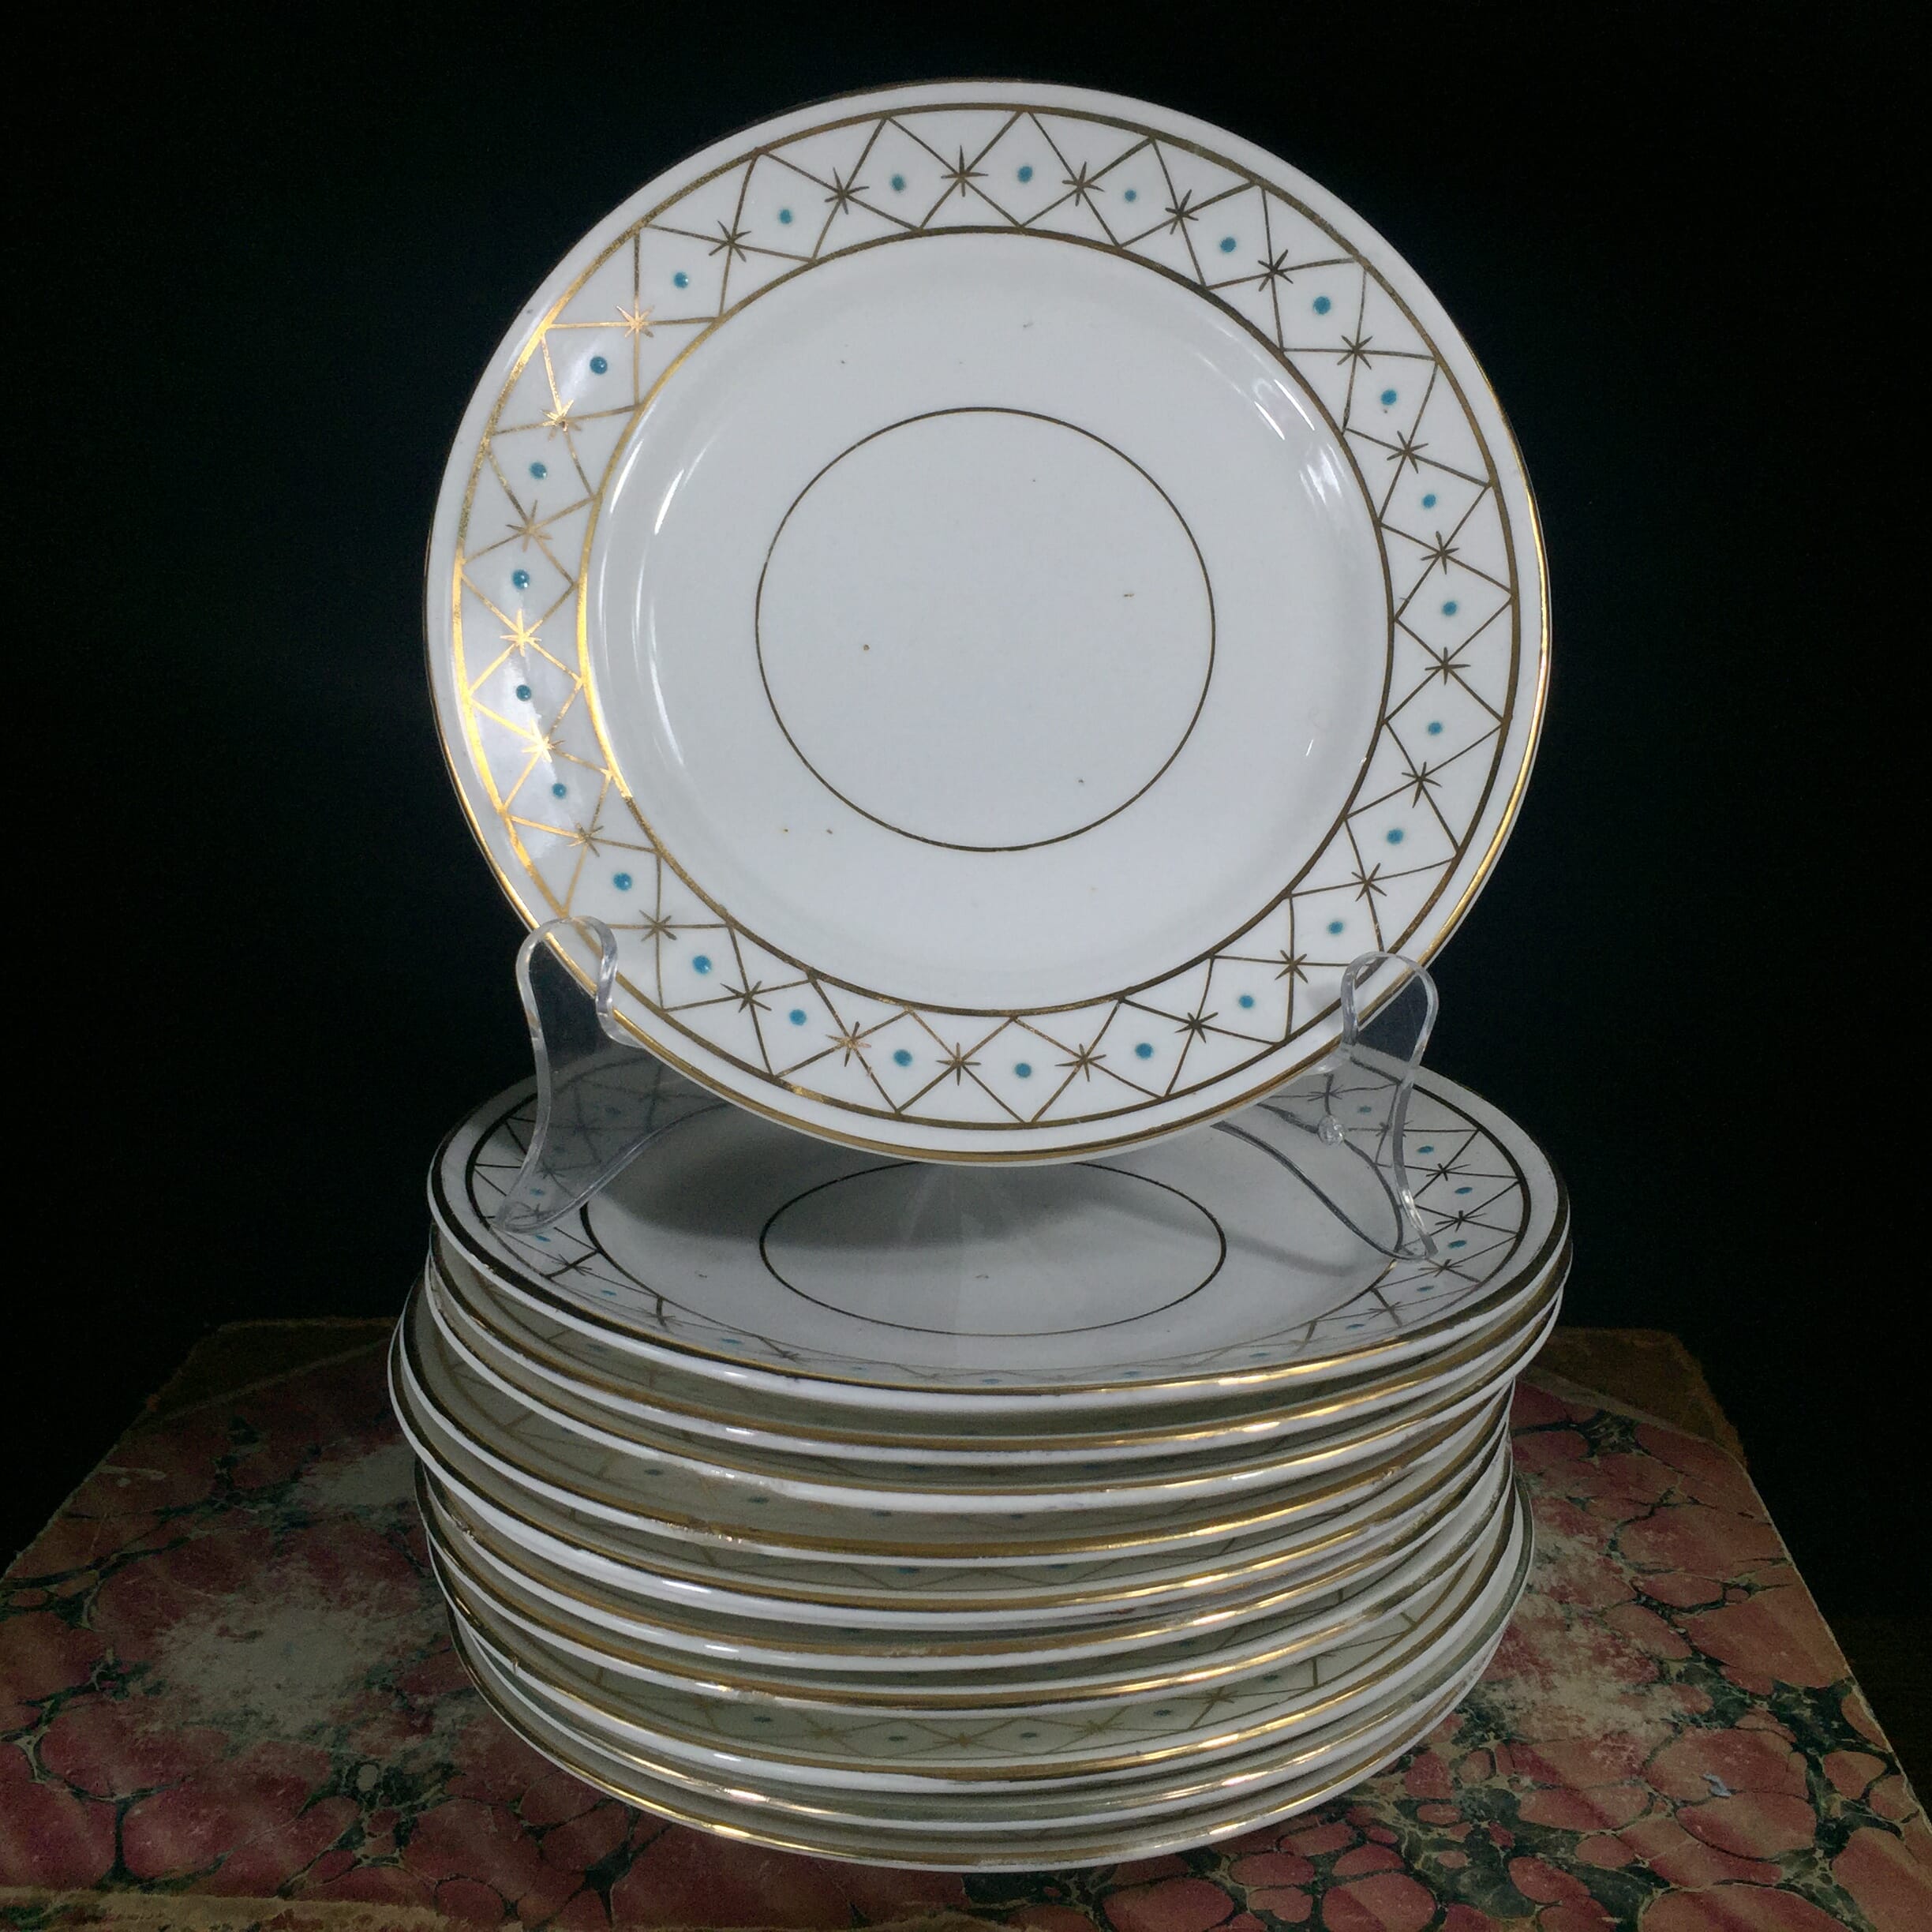 Set of 12 porcelain side plates with gilt stars and turquoise dots, c. 1880 -0